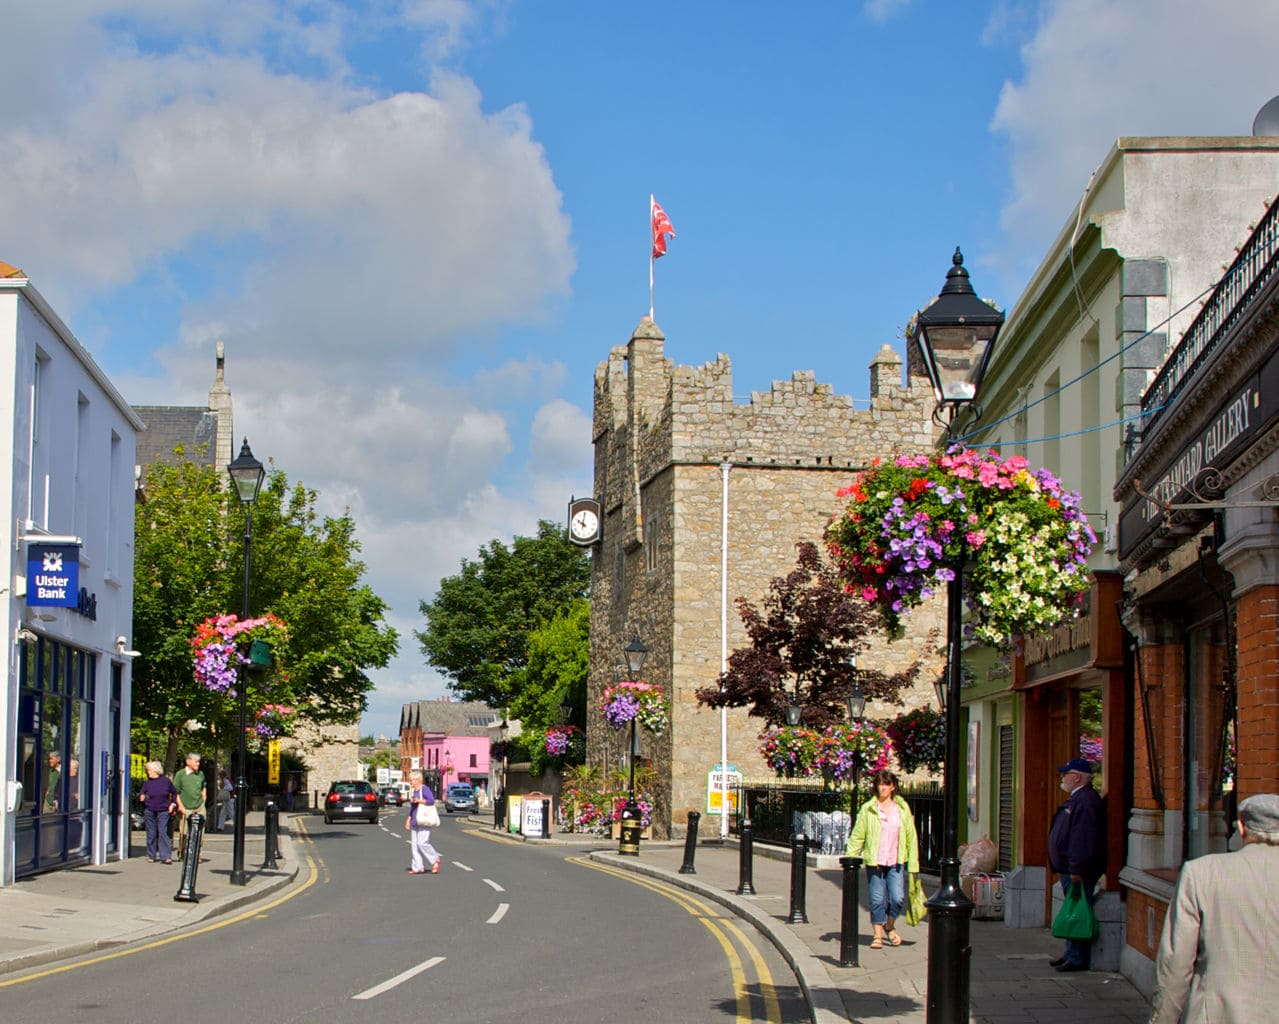 A beautiful shopping street in Howth in Ireland's Ancient East. There is a ruined castle battlement in the centre of the picture and baskets of colourful flowers hang from lightposts